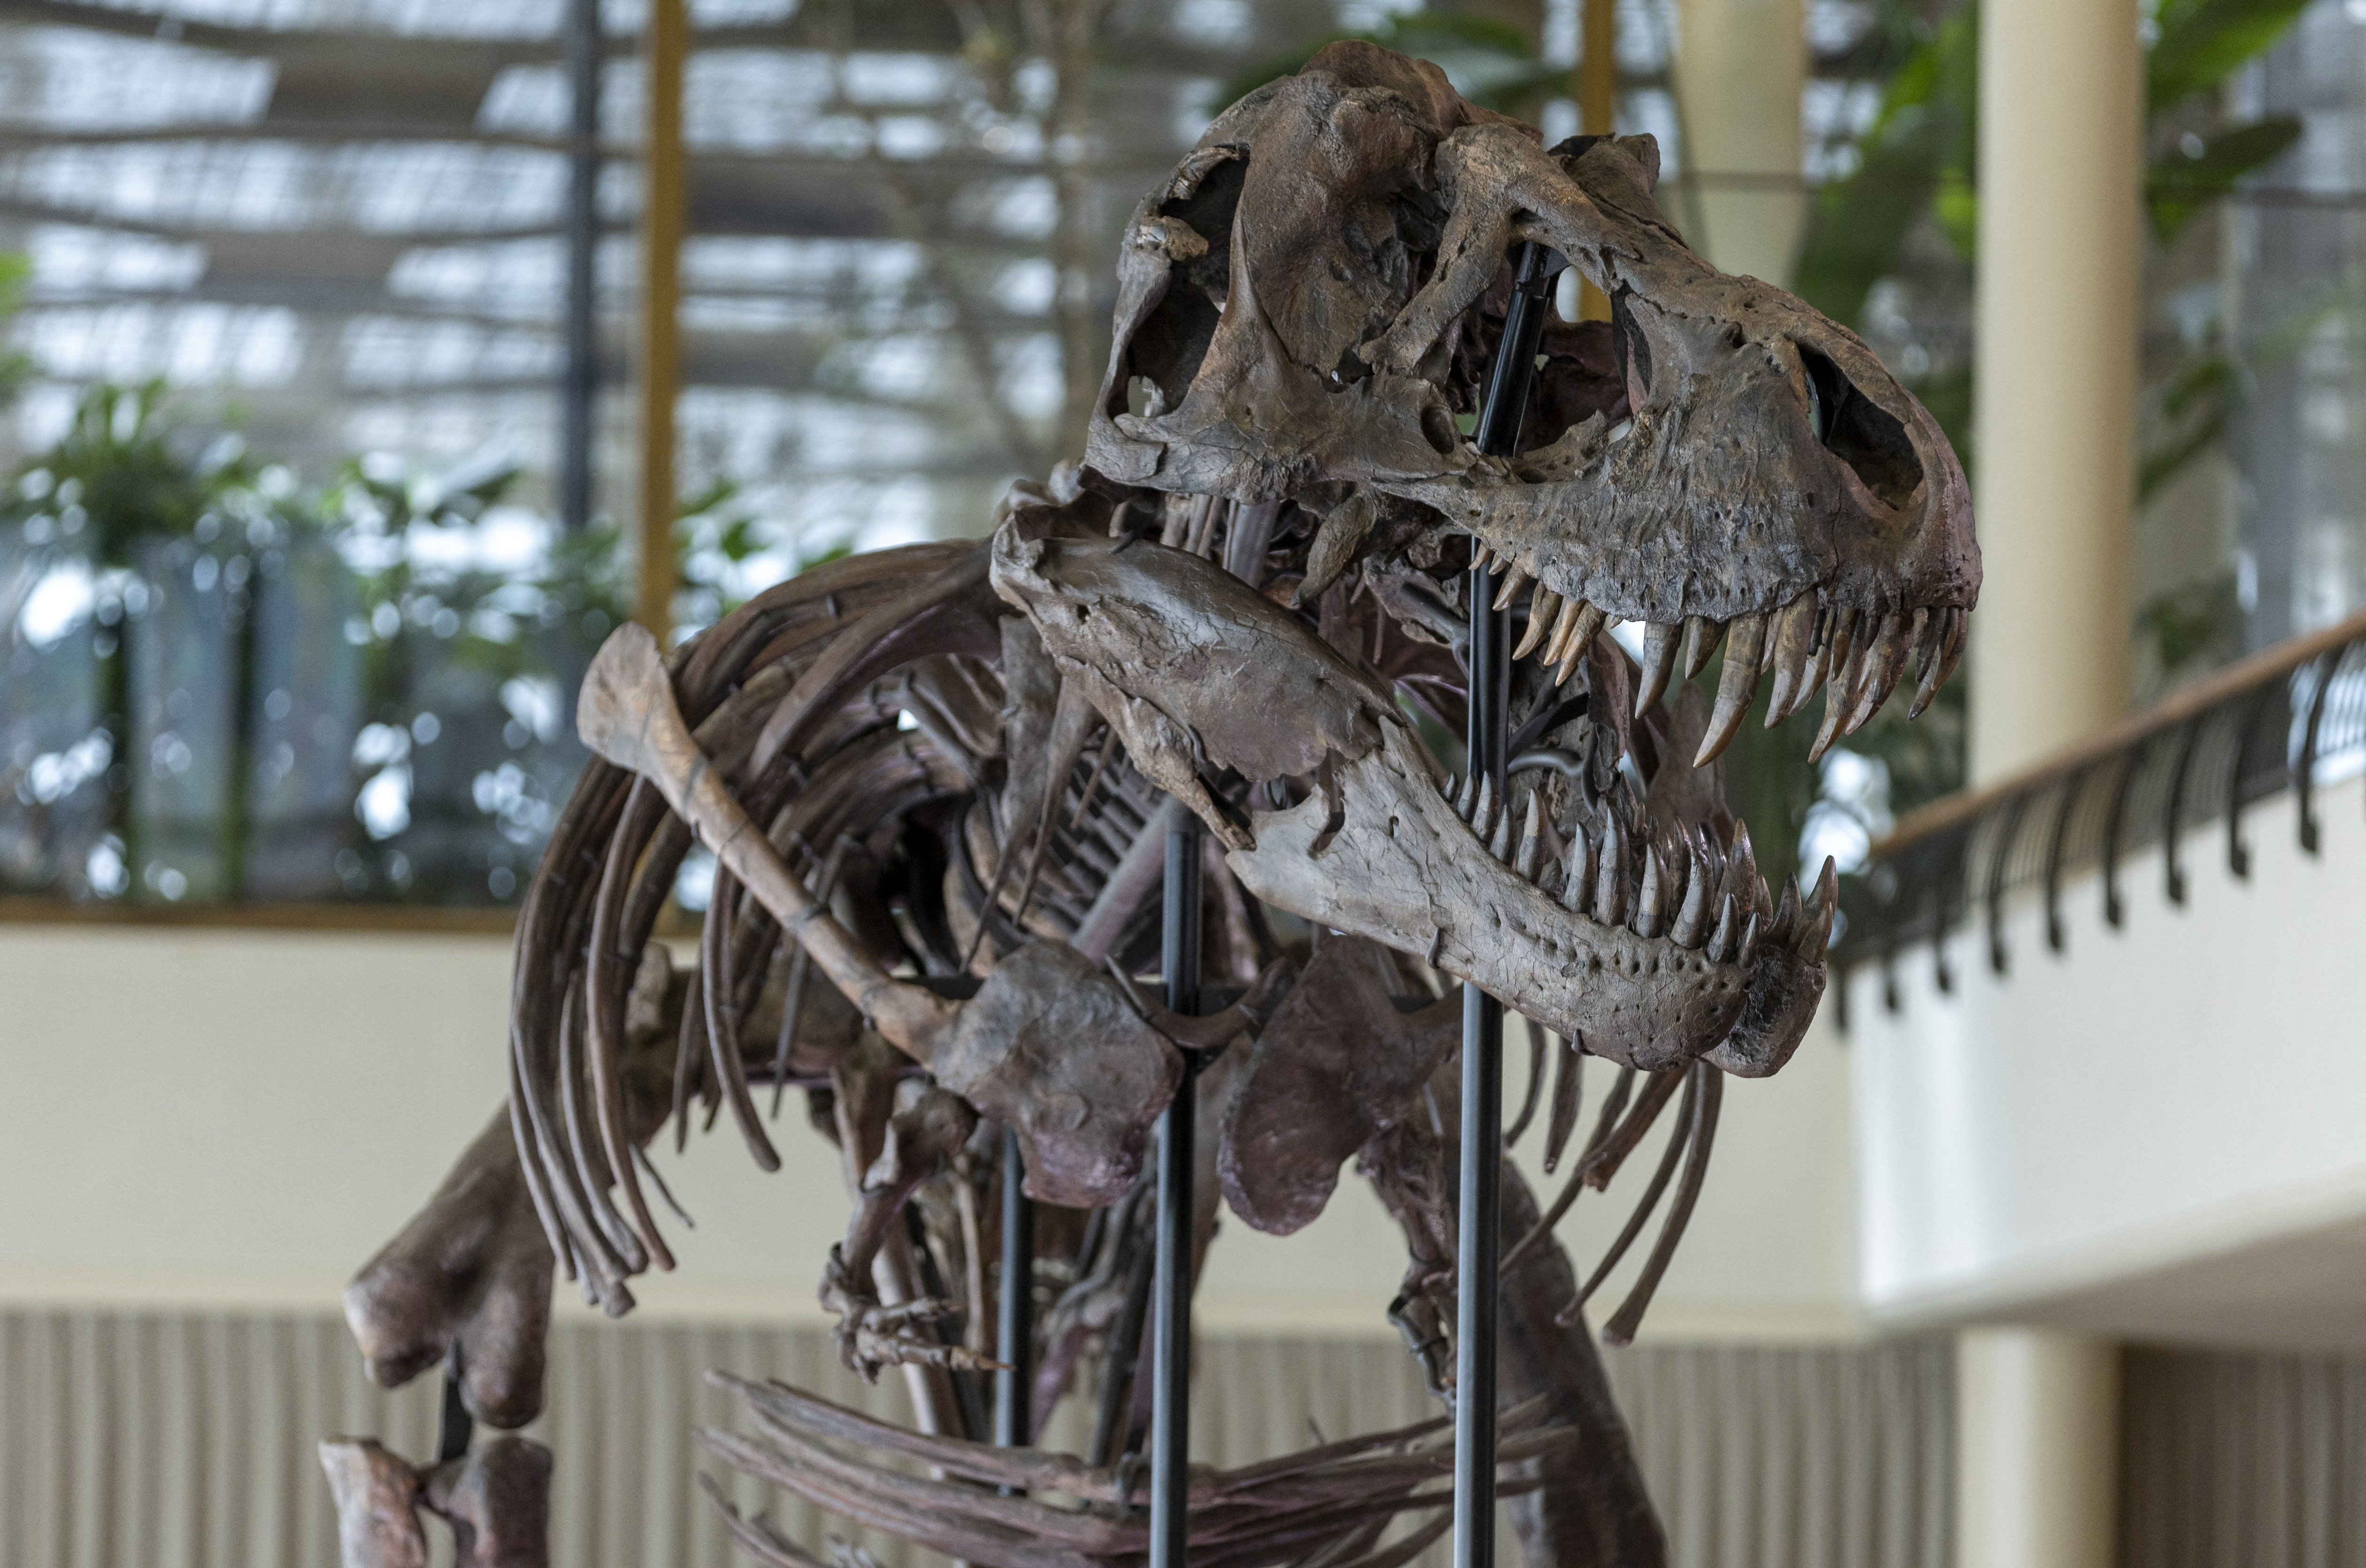 67-million-year-old T-rex skeleton presented to media before auction in Zurich